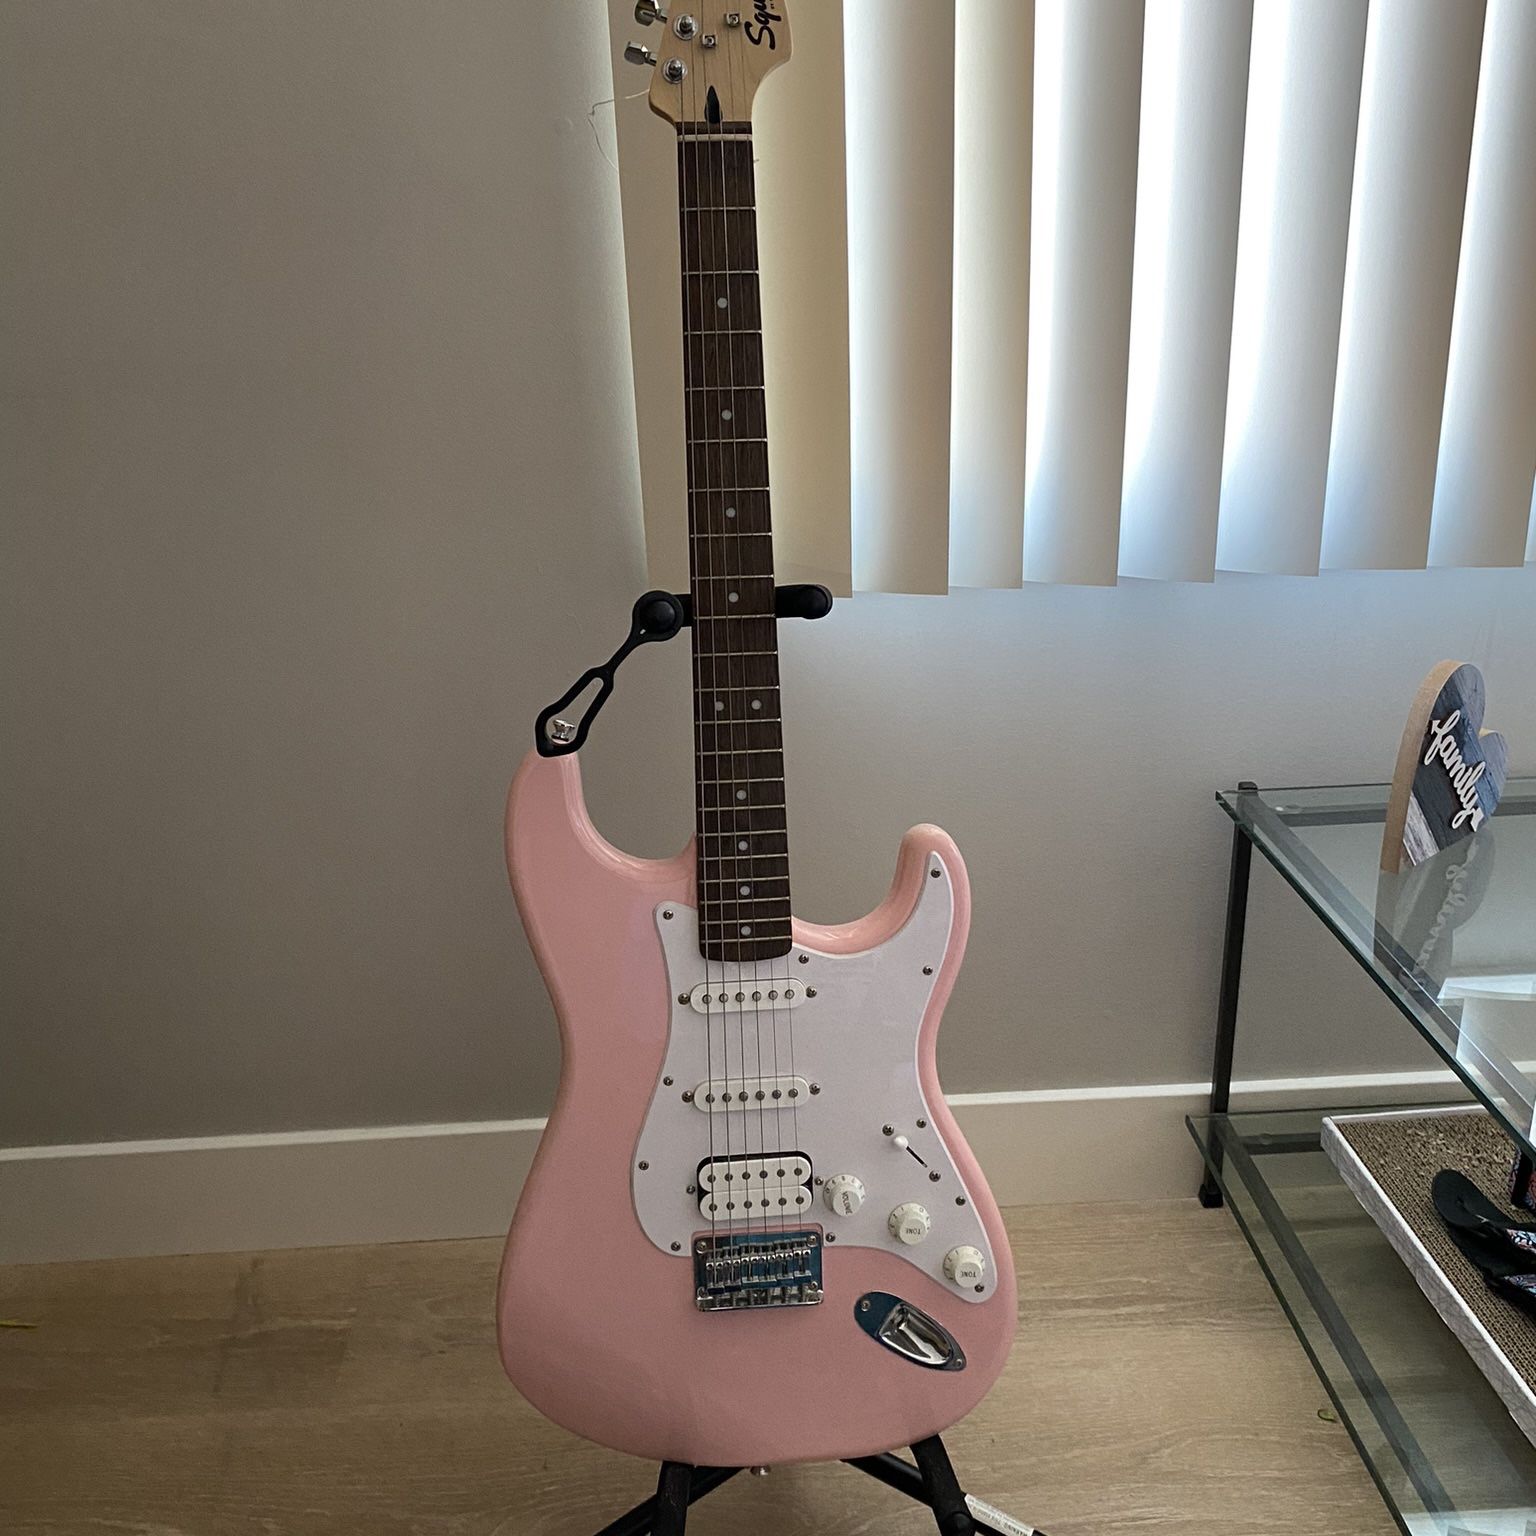 Squier stratocaster pink electric guitar